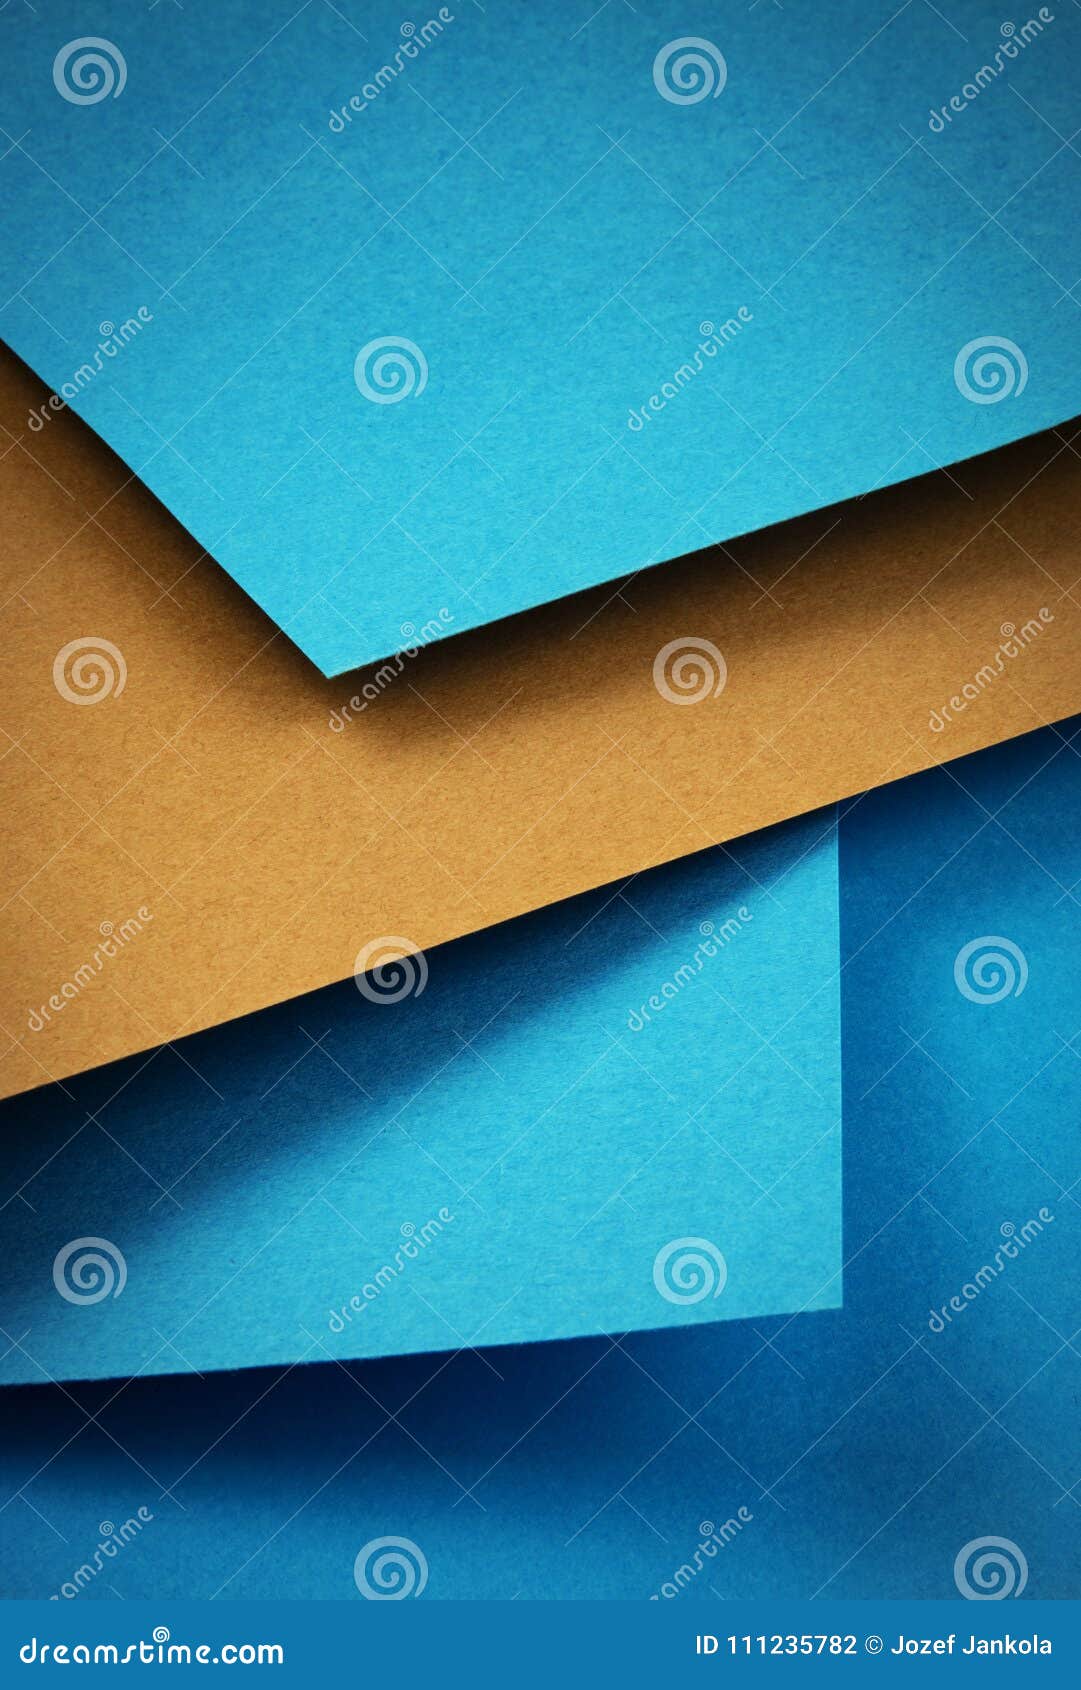 group of colored papers leathers